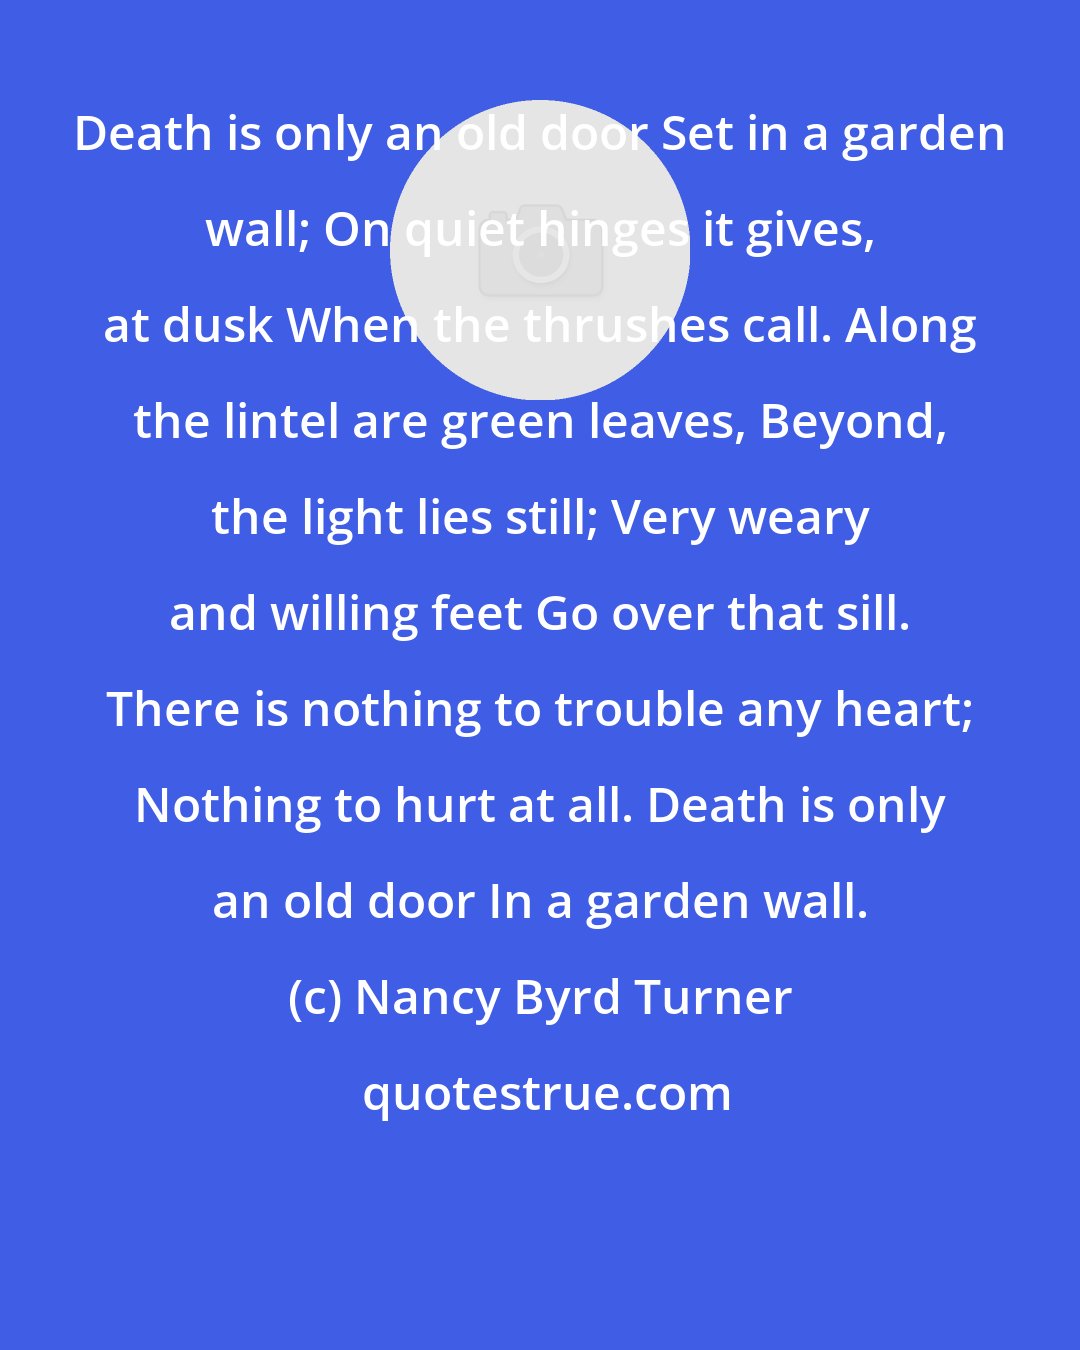 Nancy Byrd Turner: Death is only an old door Set in a garden wall; On quiet hinges it gives, at dusk When the thrushes call. Along the lintel are green leaves, Beyond, the light lies still; Very weary and willing feet Go over that sill. There is nothing to trouble any heart; Nothing to hurt at all. Death is only an old door In a garden wall.